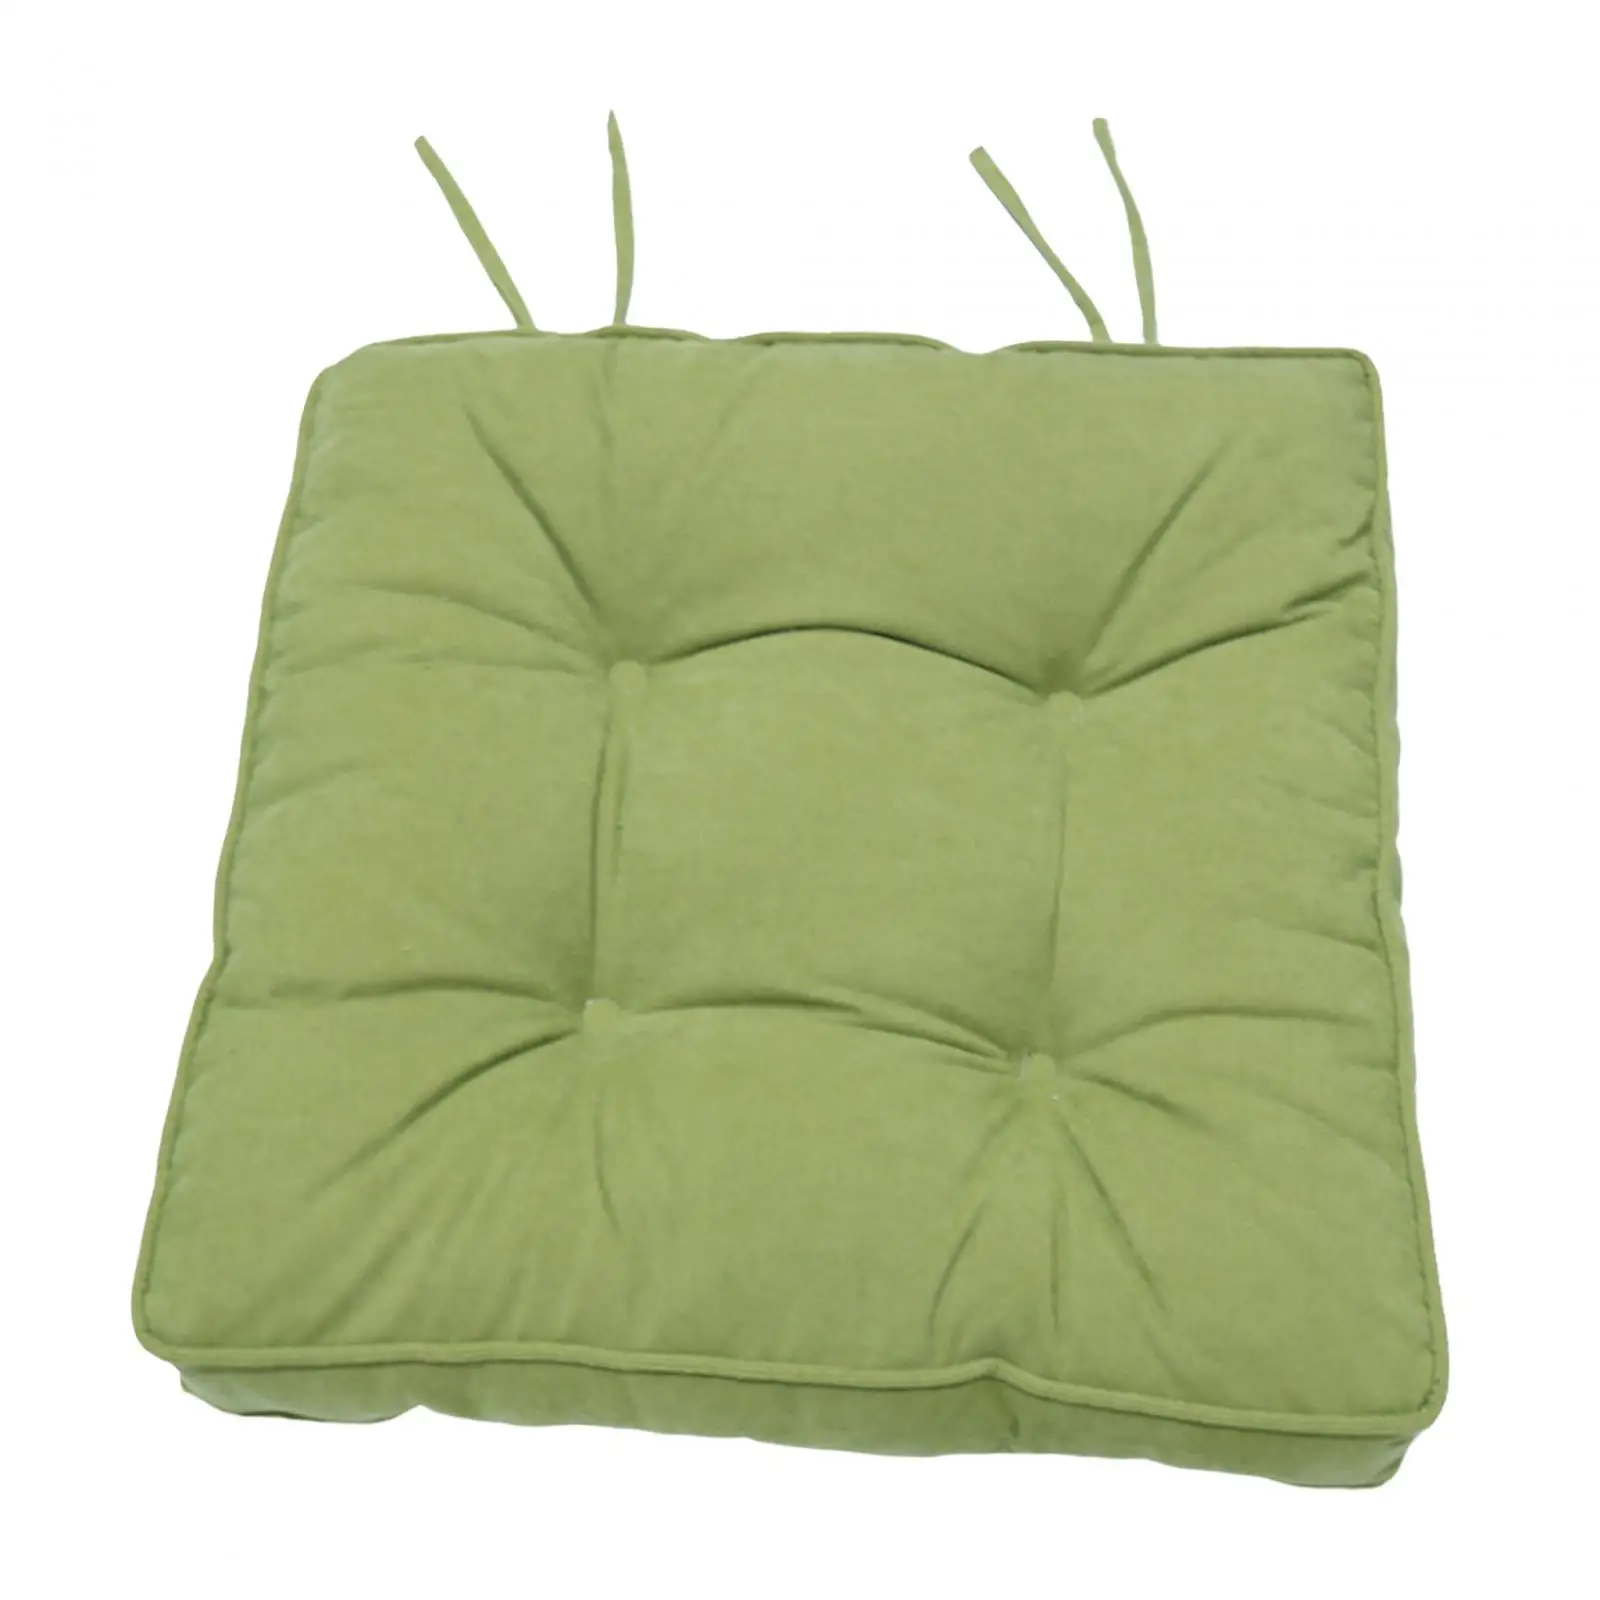 Desk Chair Cushion square Chair Pads for Watching TV Video Games Lounge